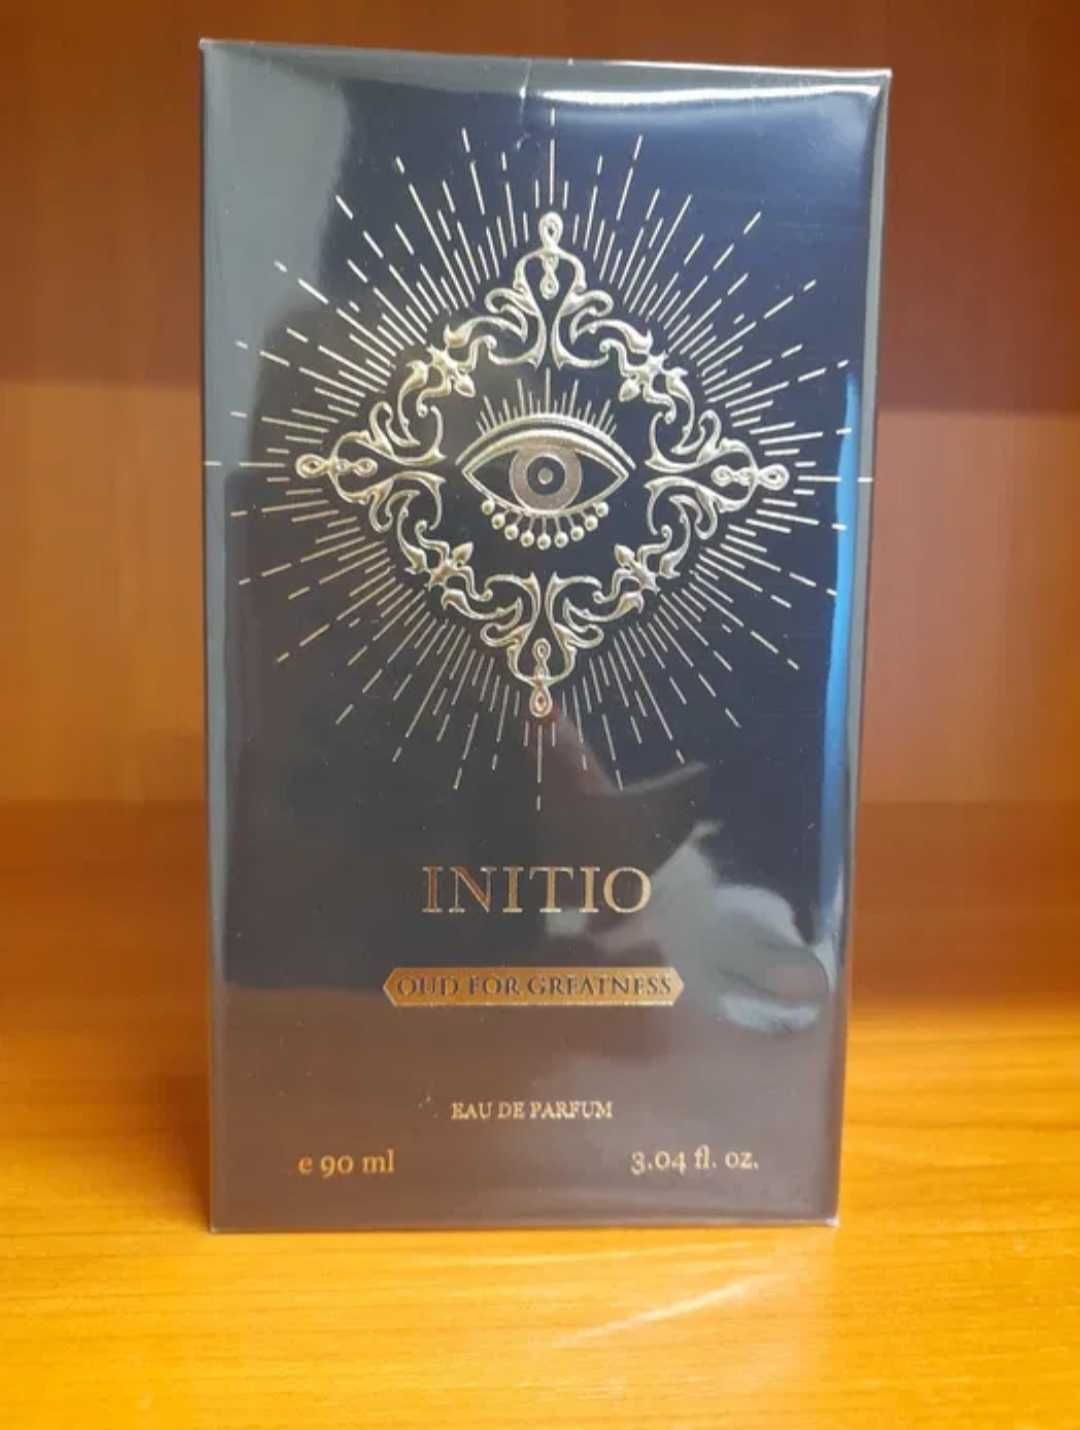 Initio Oud for Greatness